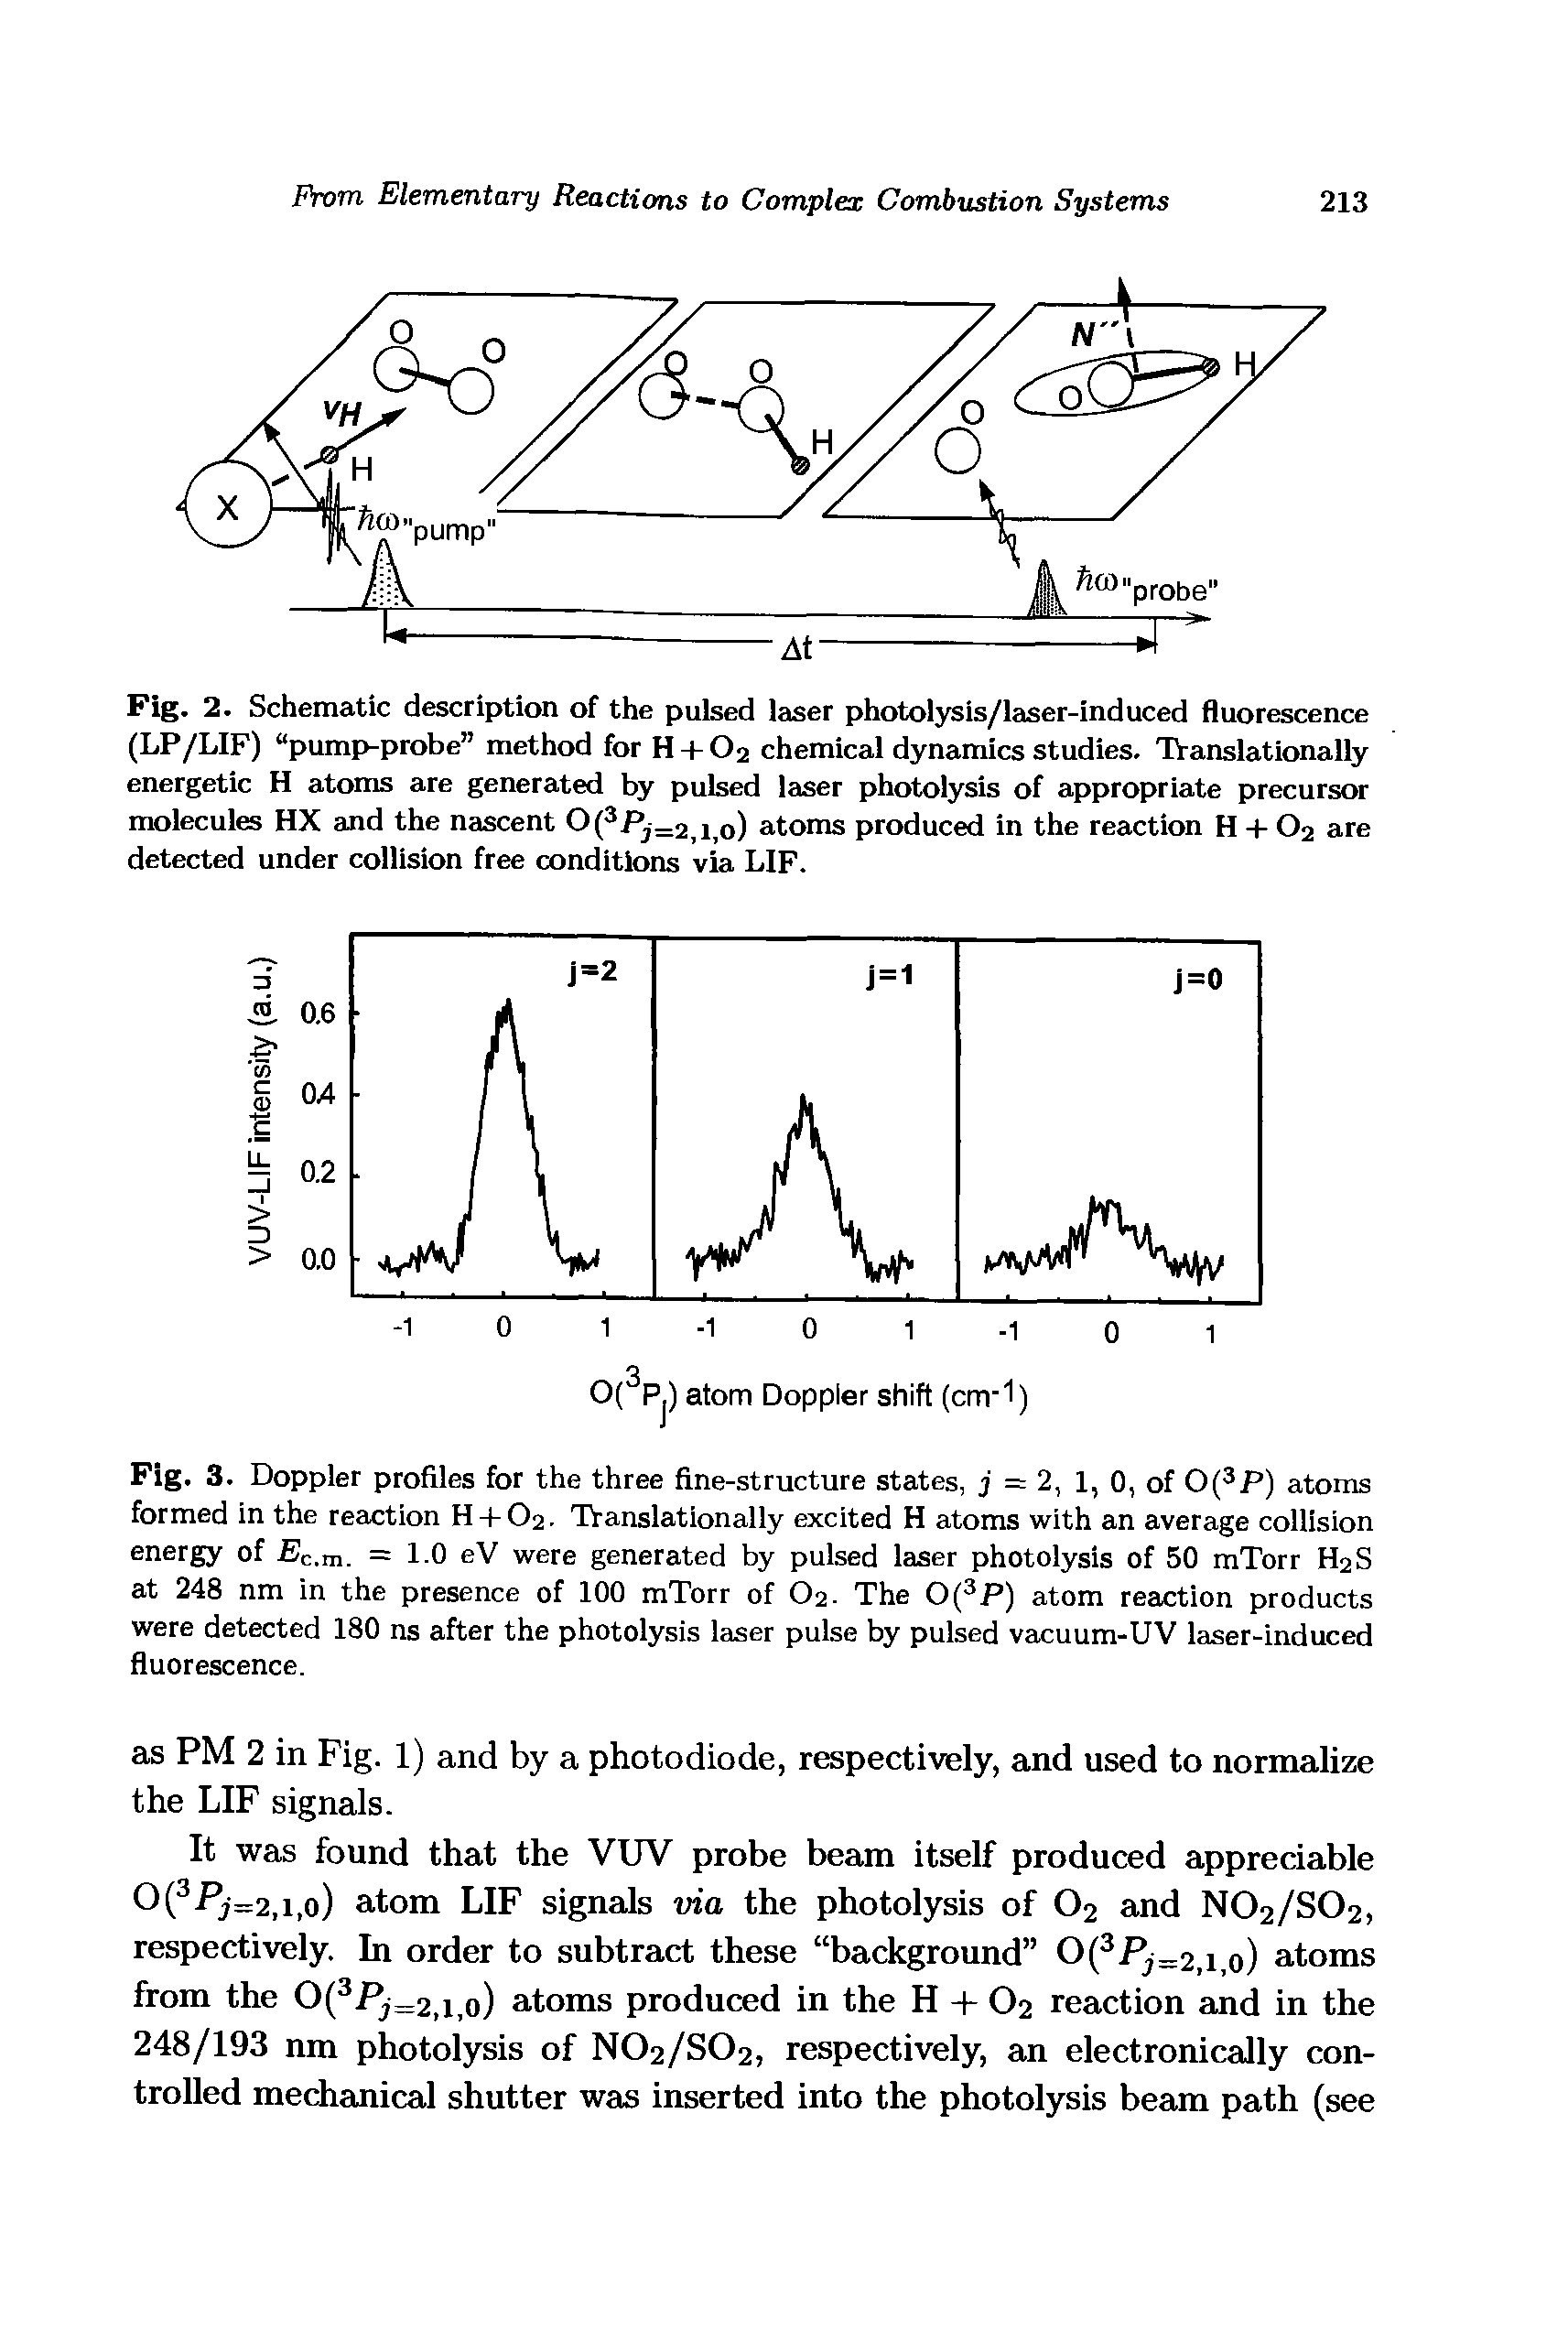 Fig. 3. Doppler profiles for the three fine-structure states, j = 2, 1, 0, of 0( P) atoms formed in the reaction H-I-O2. TVanslationally excited H atoms with an average collision energy of Ec.m. = 10 eV were generated by pulsed laser photolysis of 50 mTorr H2S at 248 nm in the presence of 100 mTorr of O2. The 0( P) atom reaction products were detected 180 ns after the photolysis laser pulse by pulsed vacuum-UV laser-induced fluorescence.